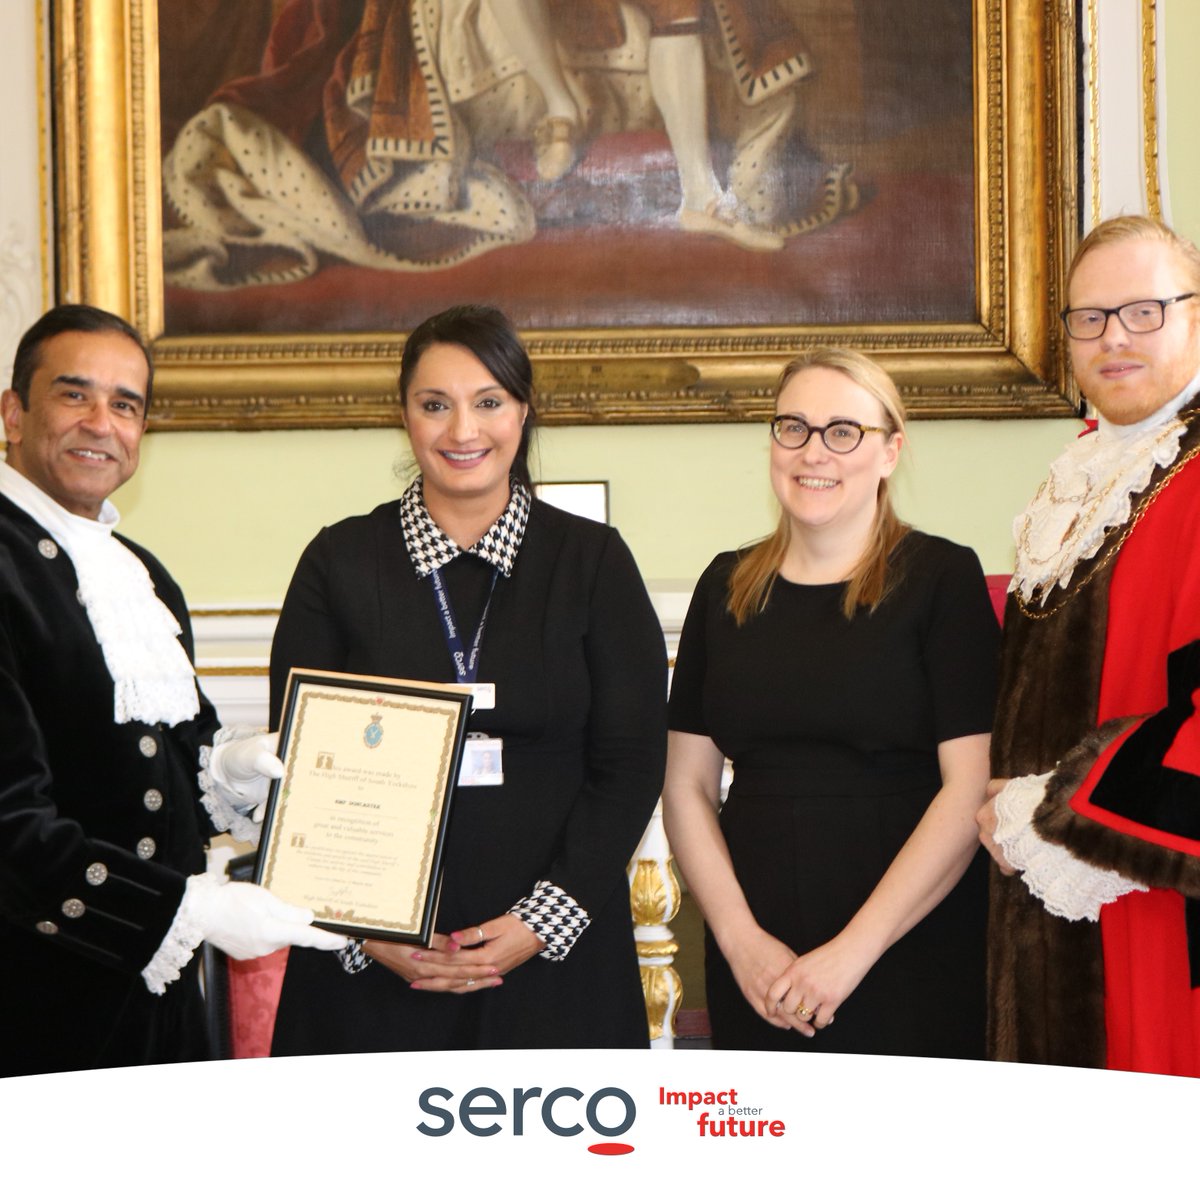 We are proud to announce that HMP Doncaster has won the High Sheriff Award 2024 in recognition of great and valuable services to the community. Professor Jaydip Ray, High Sheriff of South Yorkshire, visited HMP Doncaster to award them with this certificate. #ImpactABetterFuture